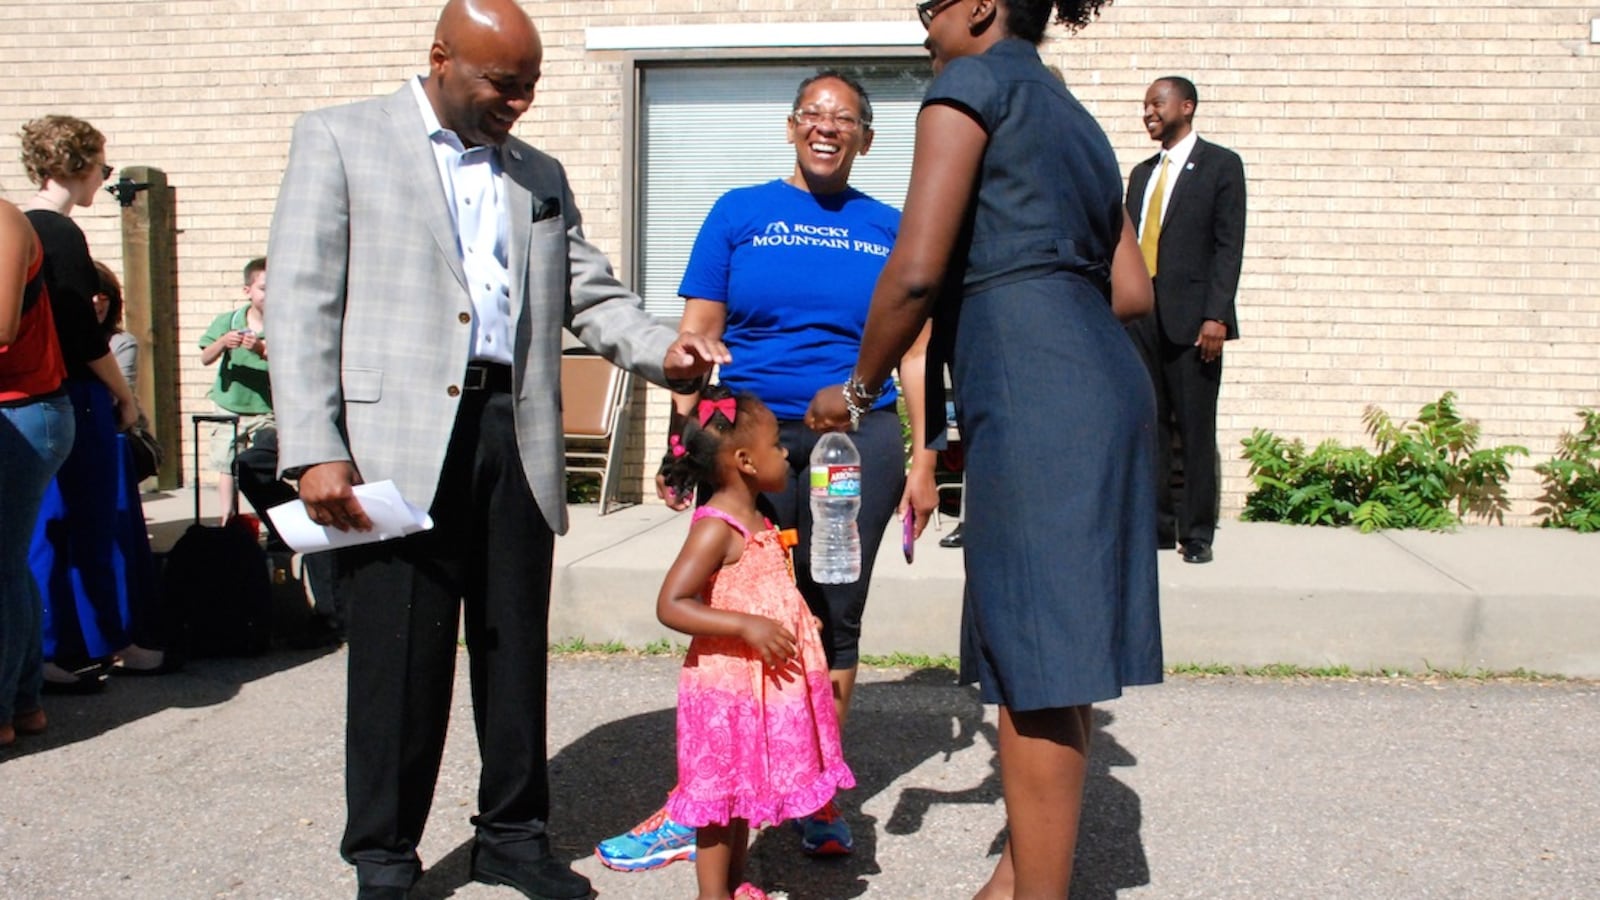 Denver Mayor Michael Hancock met with preschool families in 2014 before announcing his support for a tax increase for the Denver Preschool Program.